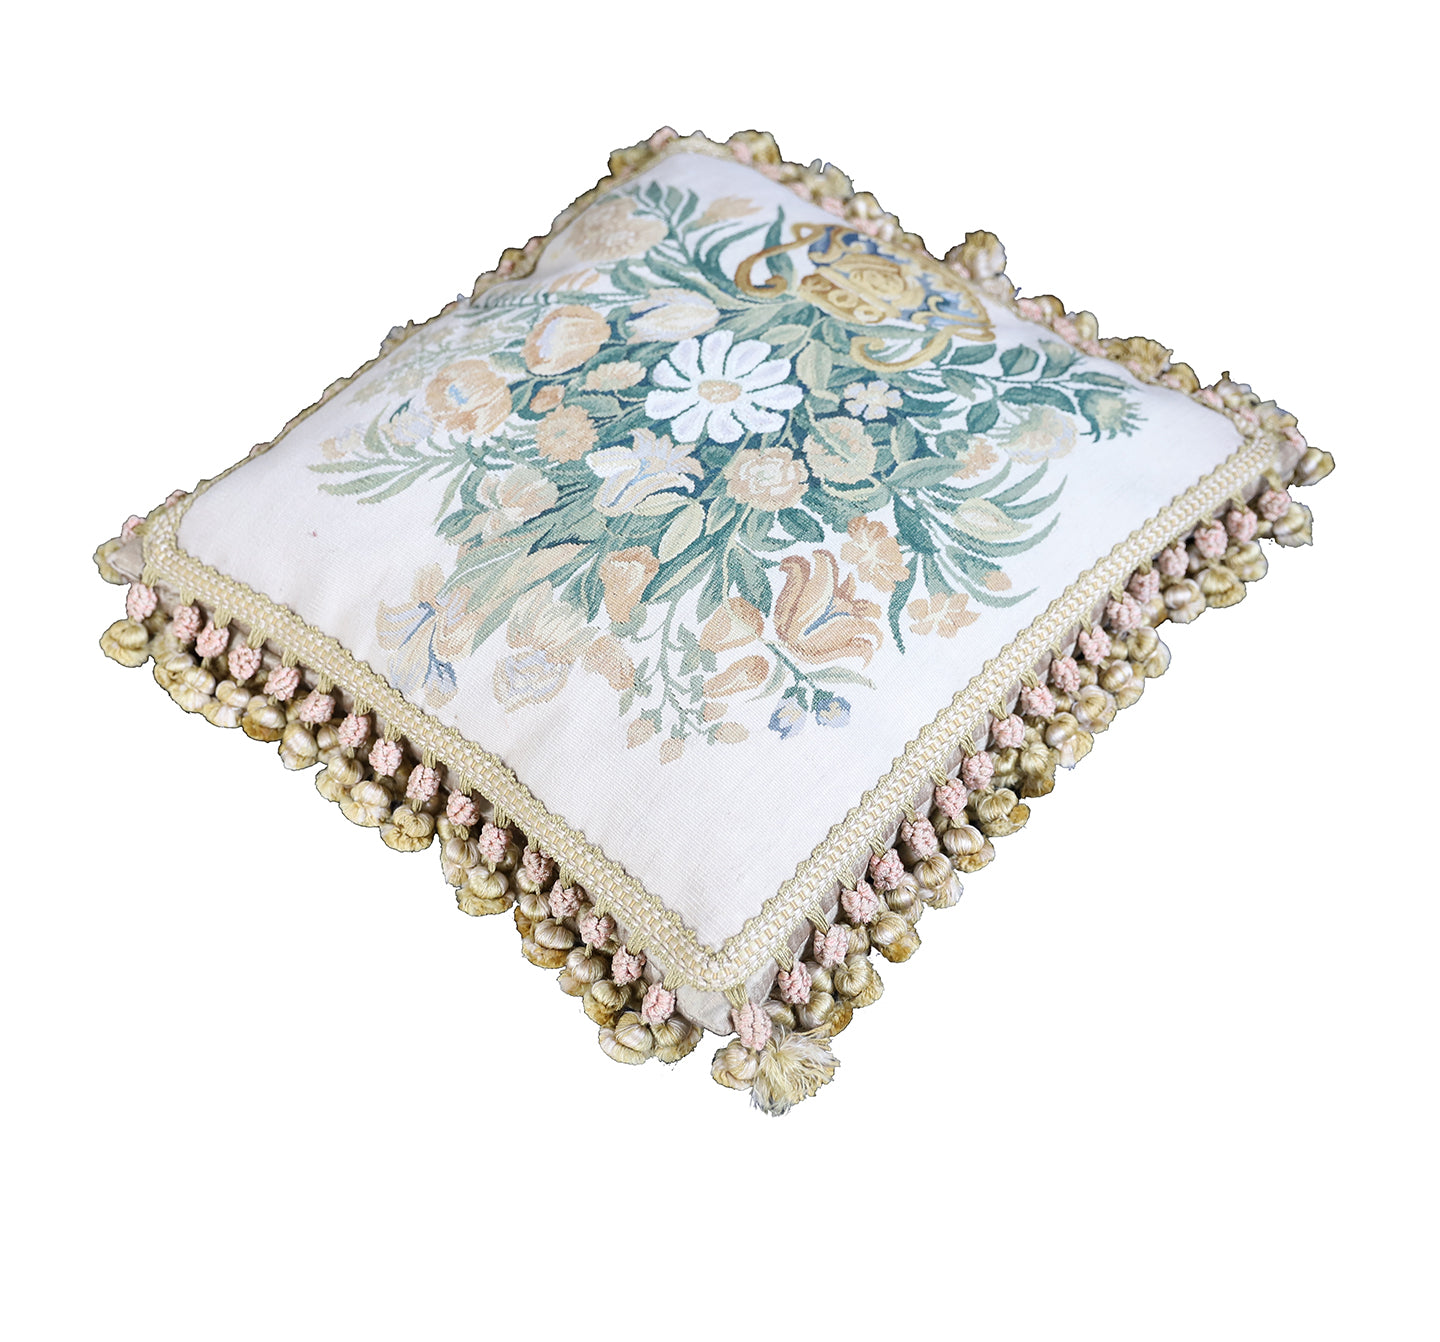 19"x18" Hand Woven Aubusson Tapestry Pillow Case